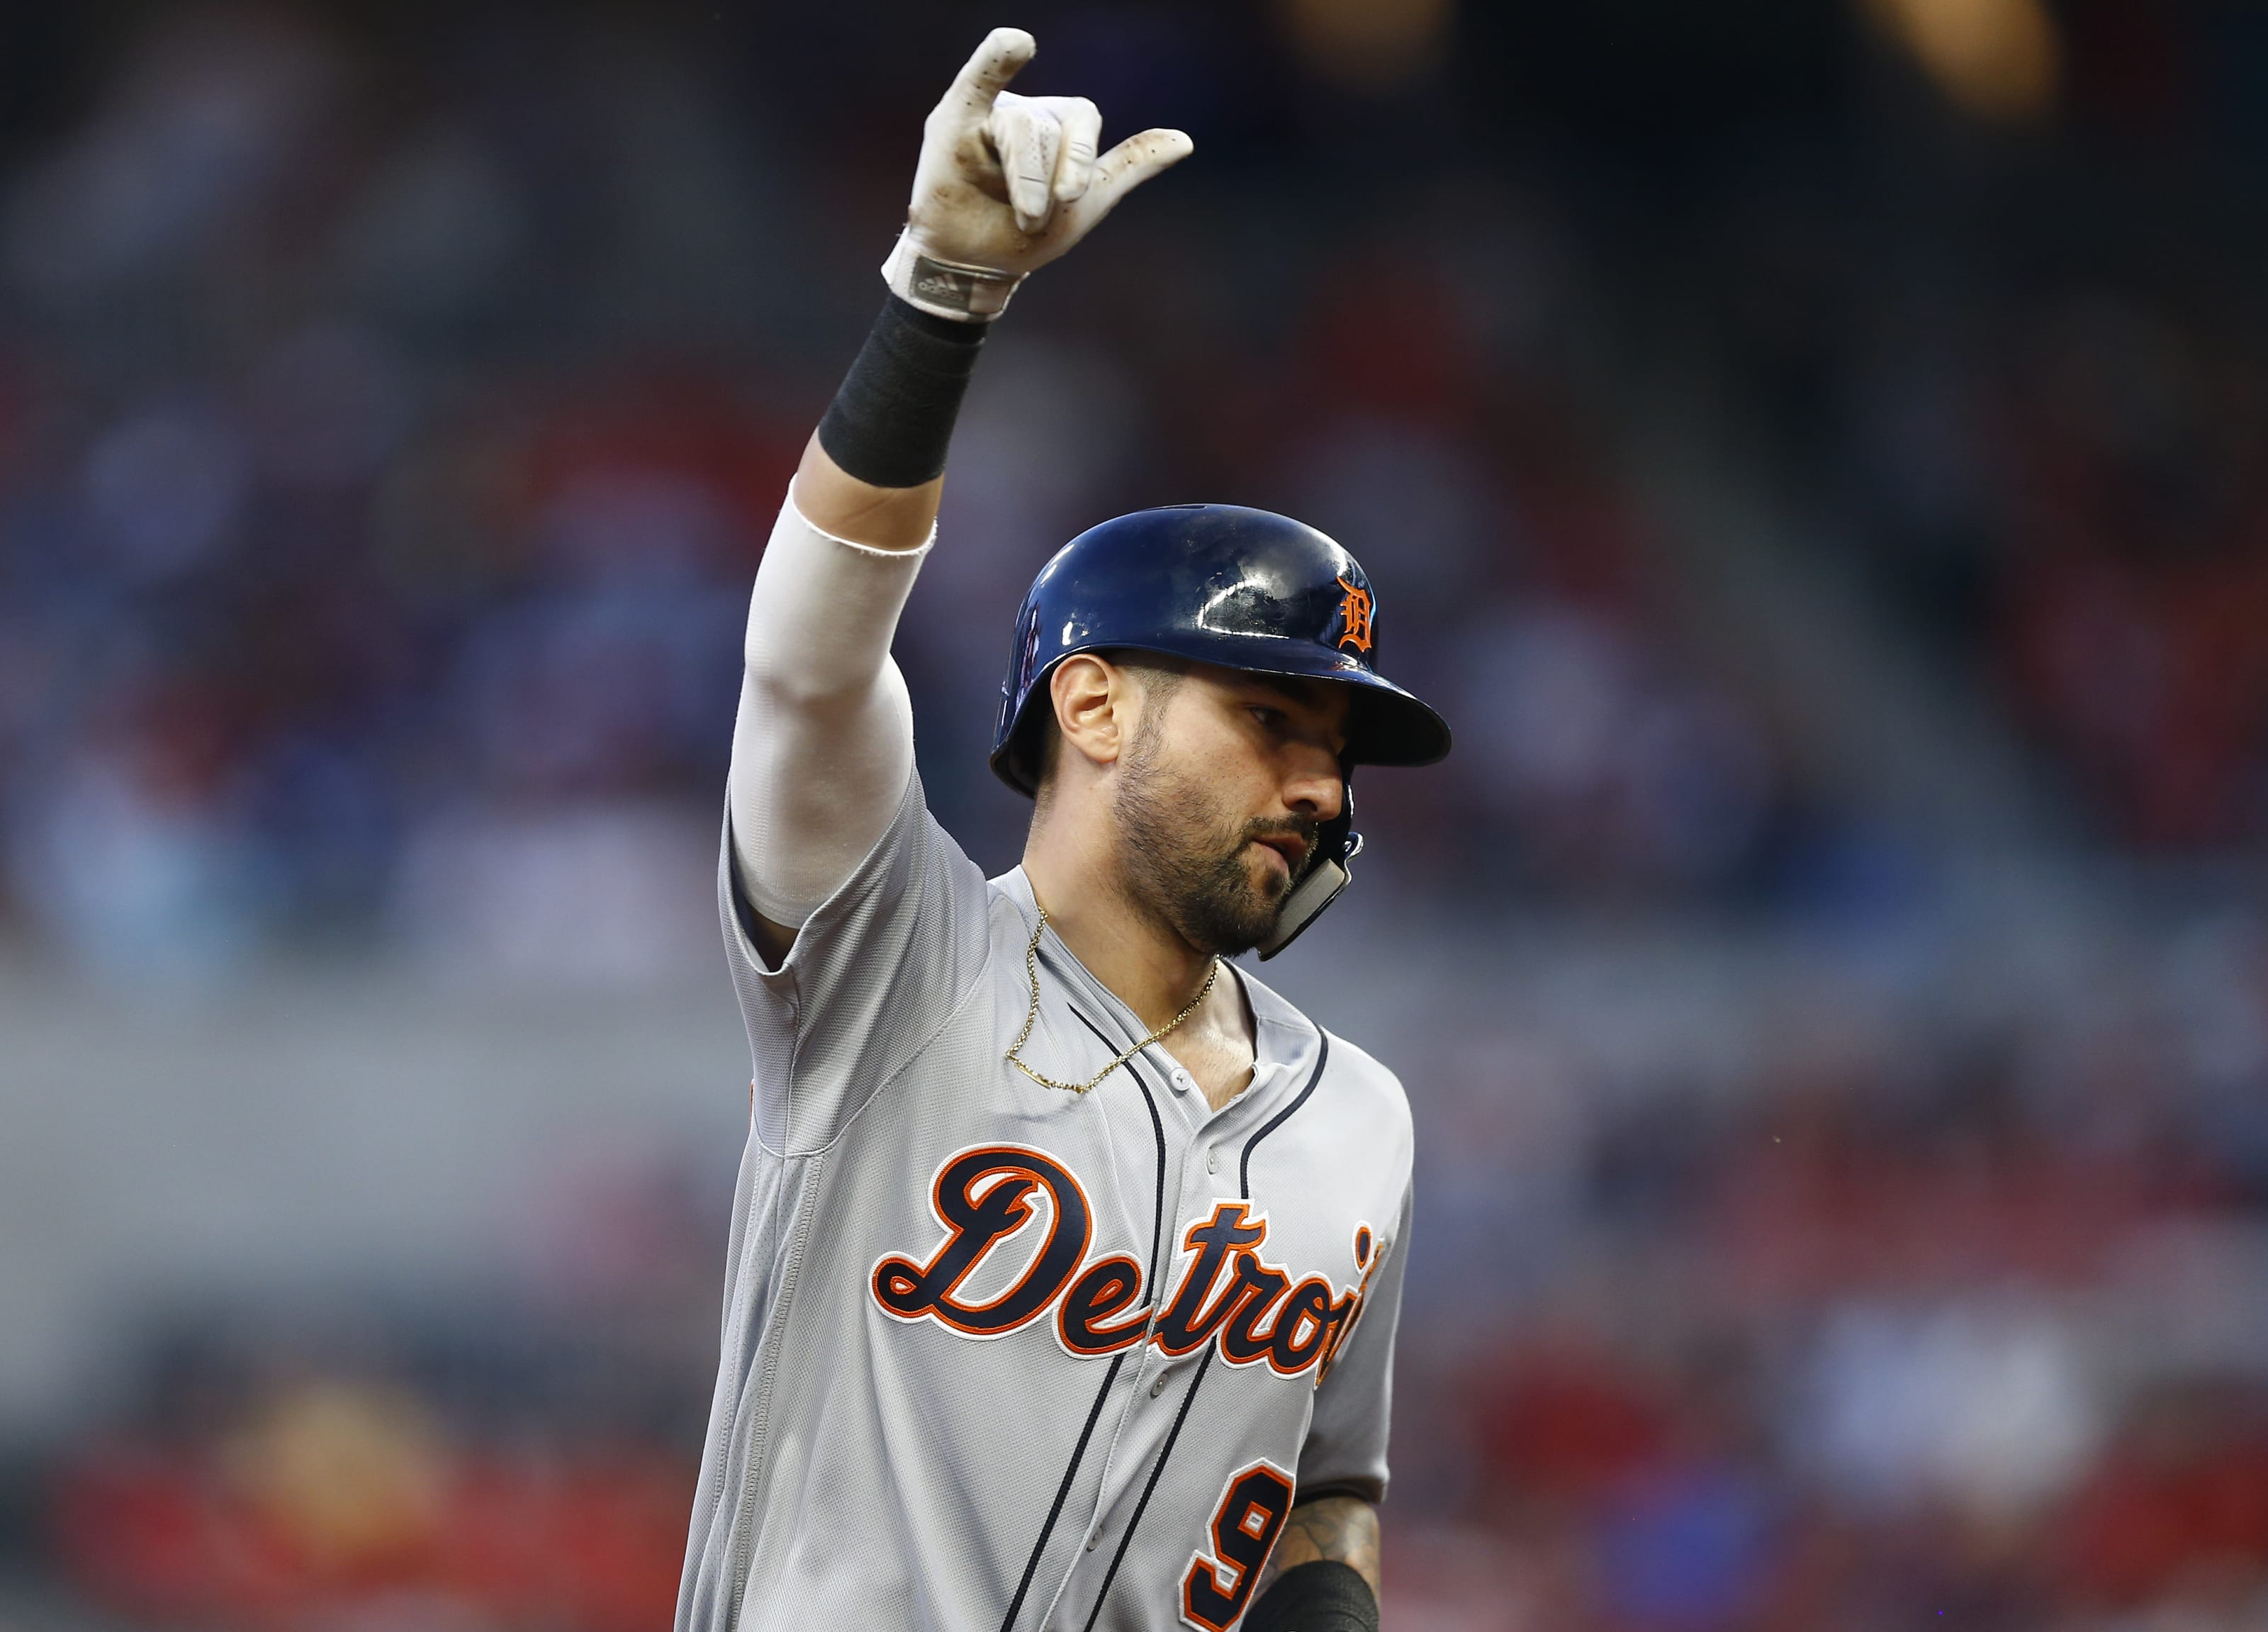 Cubs get Nick Castellanos in trade from the Tigers at the last